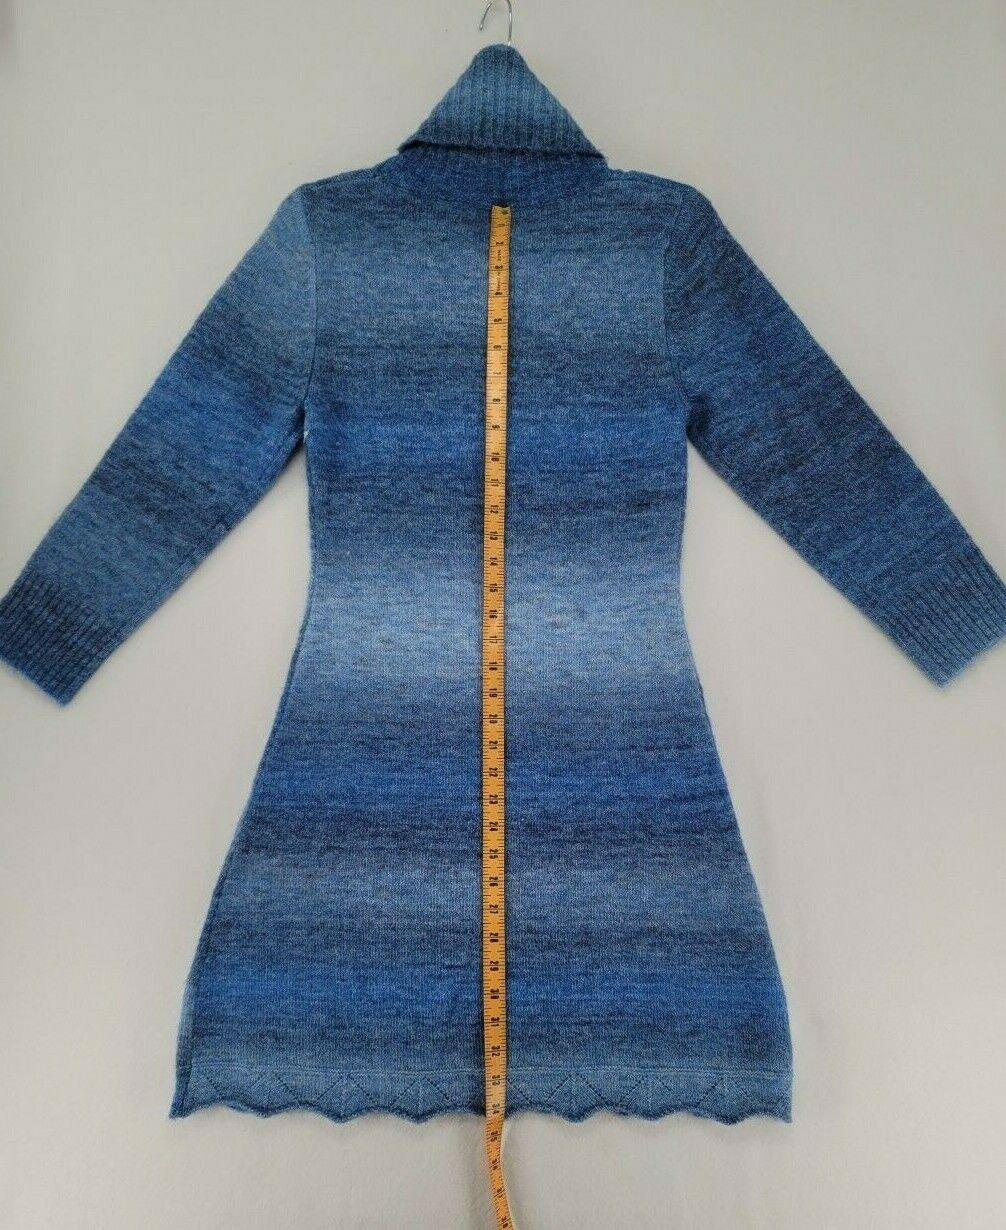 RONNI NICOLE  Blue Ombre Knit Sweater Dress Size S - SVNYFancy